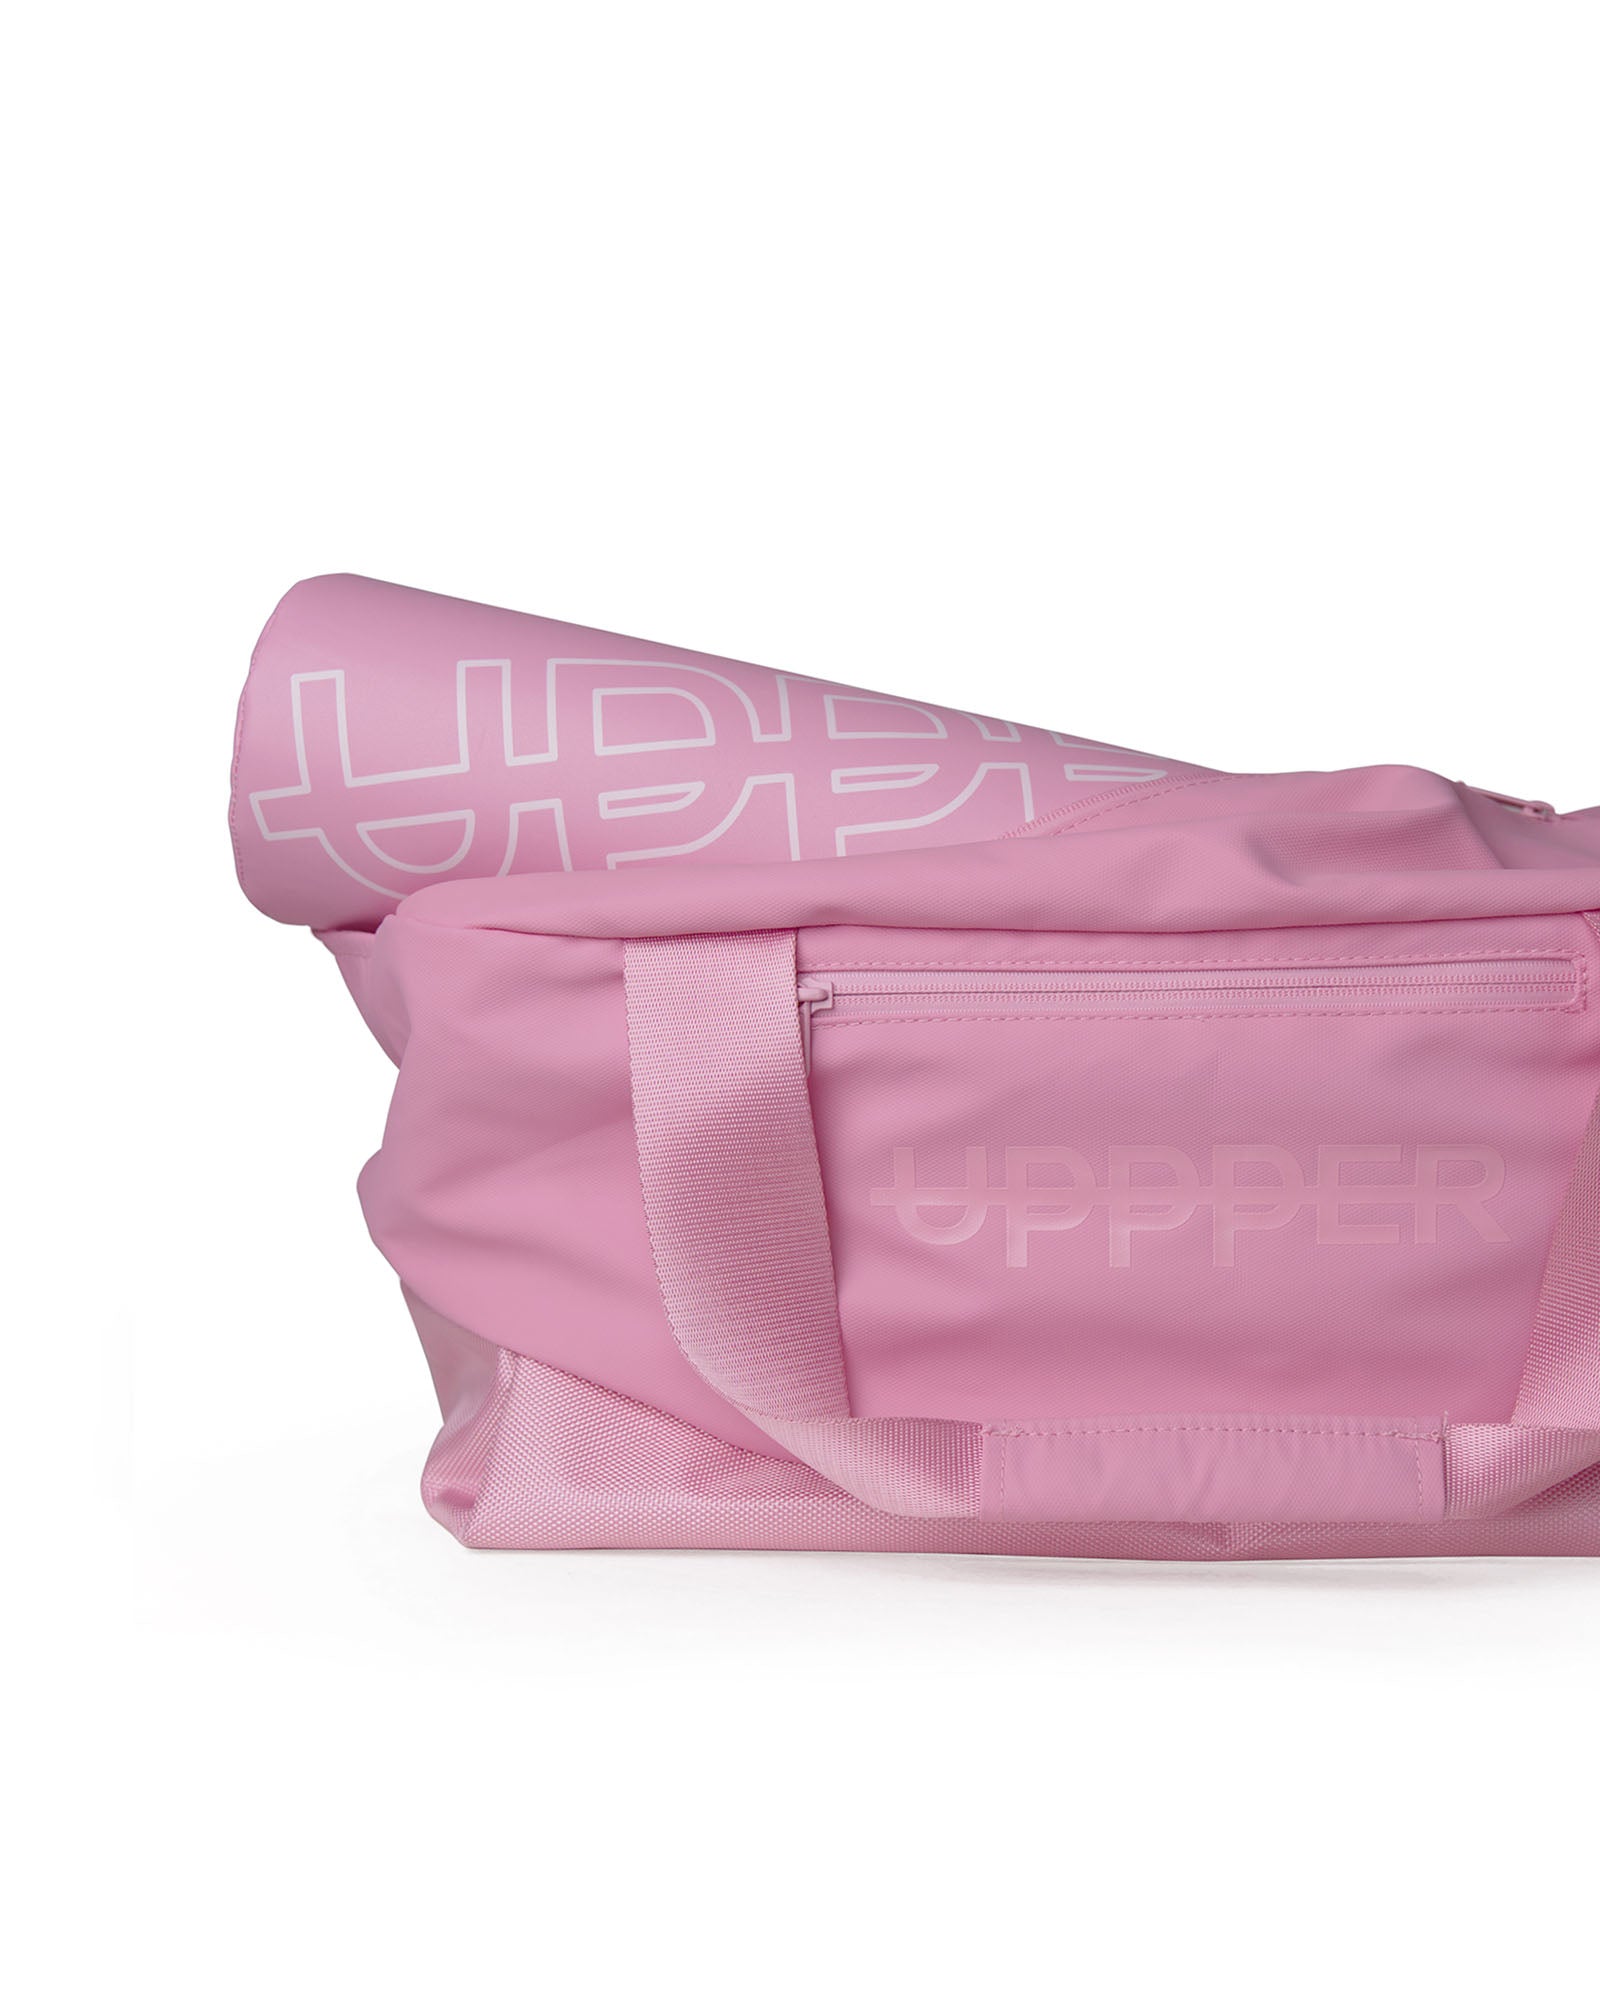 uppper gym bag pink with barbell pad inside of it